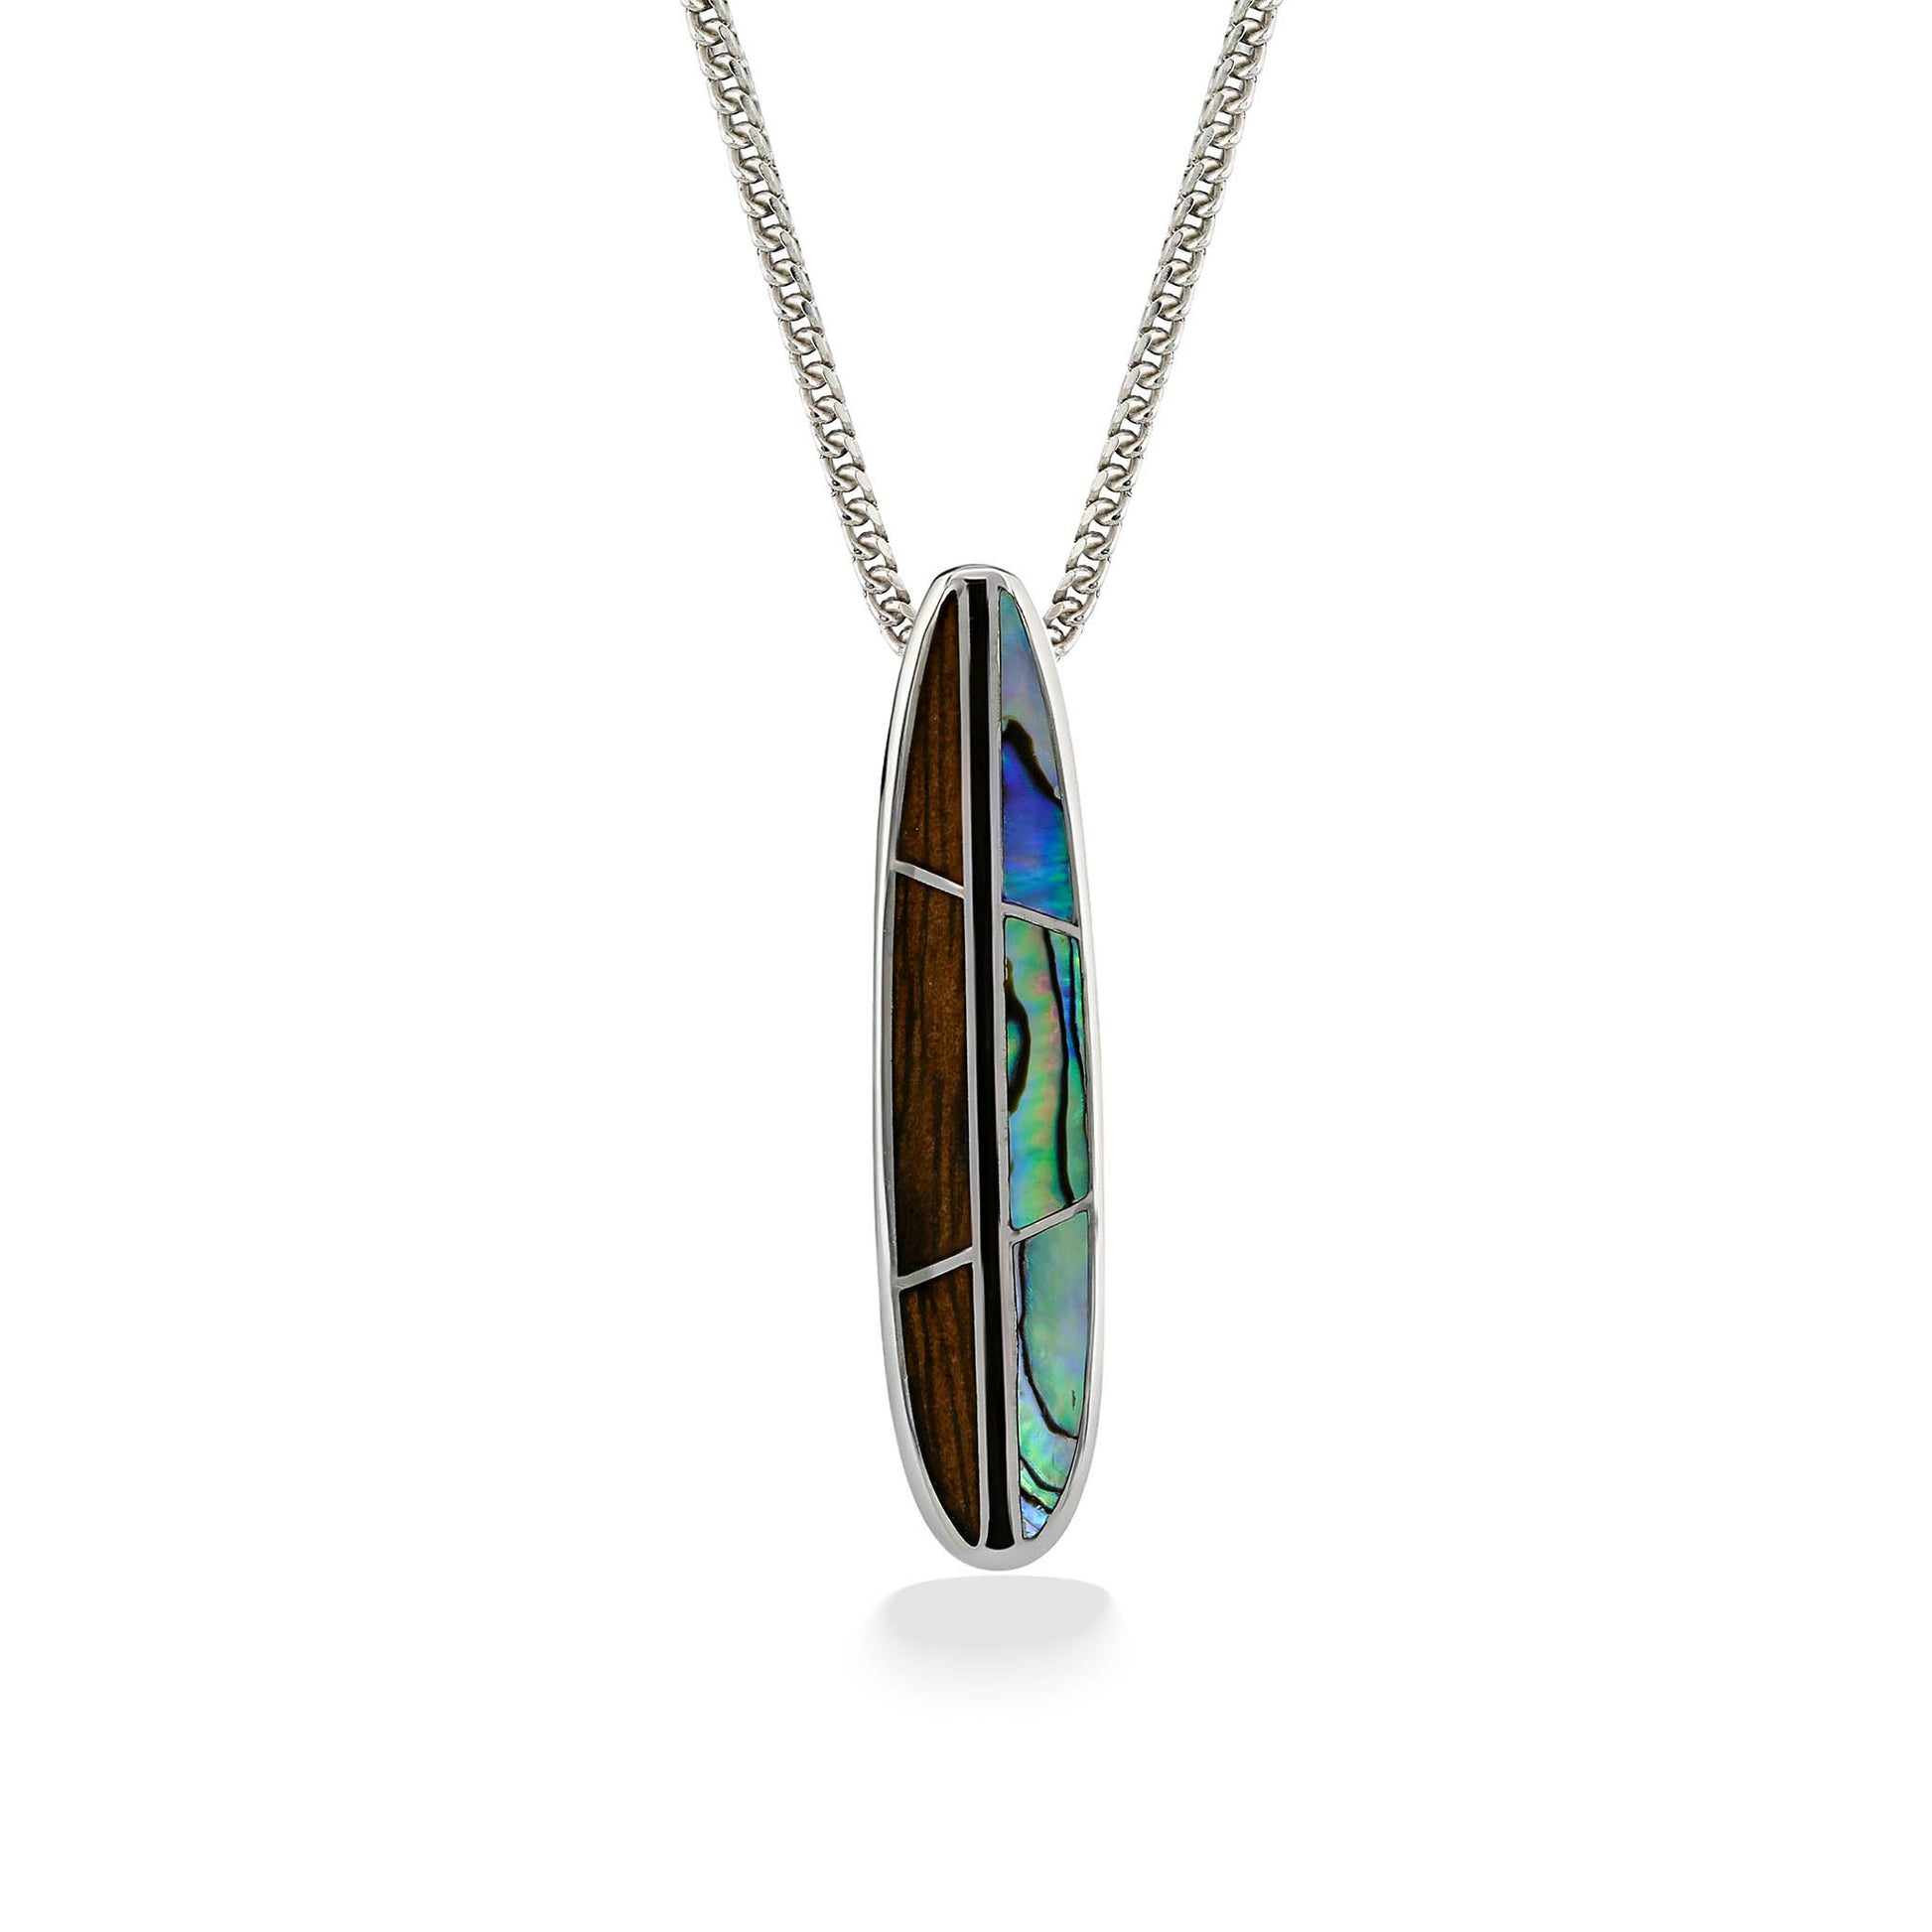 44765 - Sterling Silver - Surfboard Pendant with Enamel, Abalone and Koa Wood